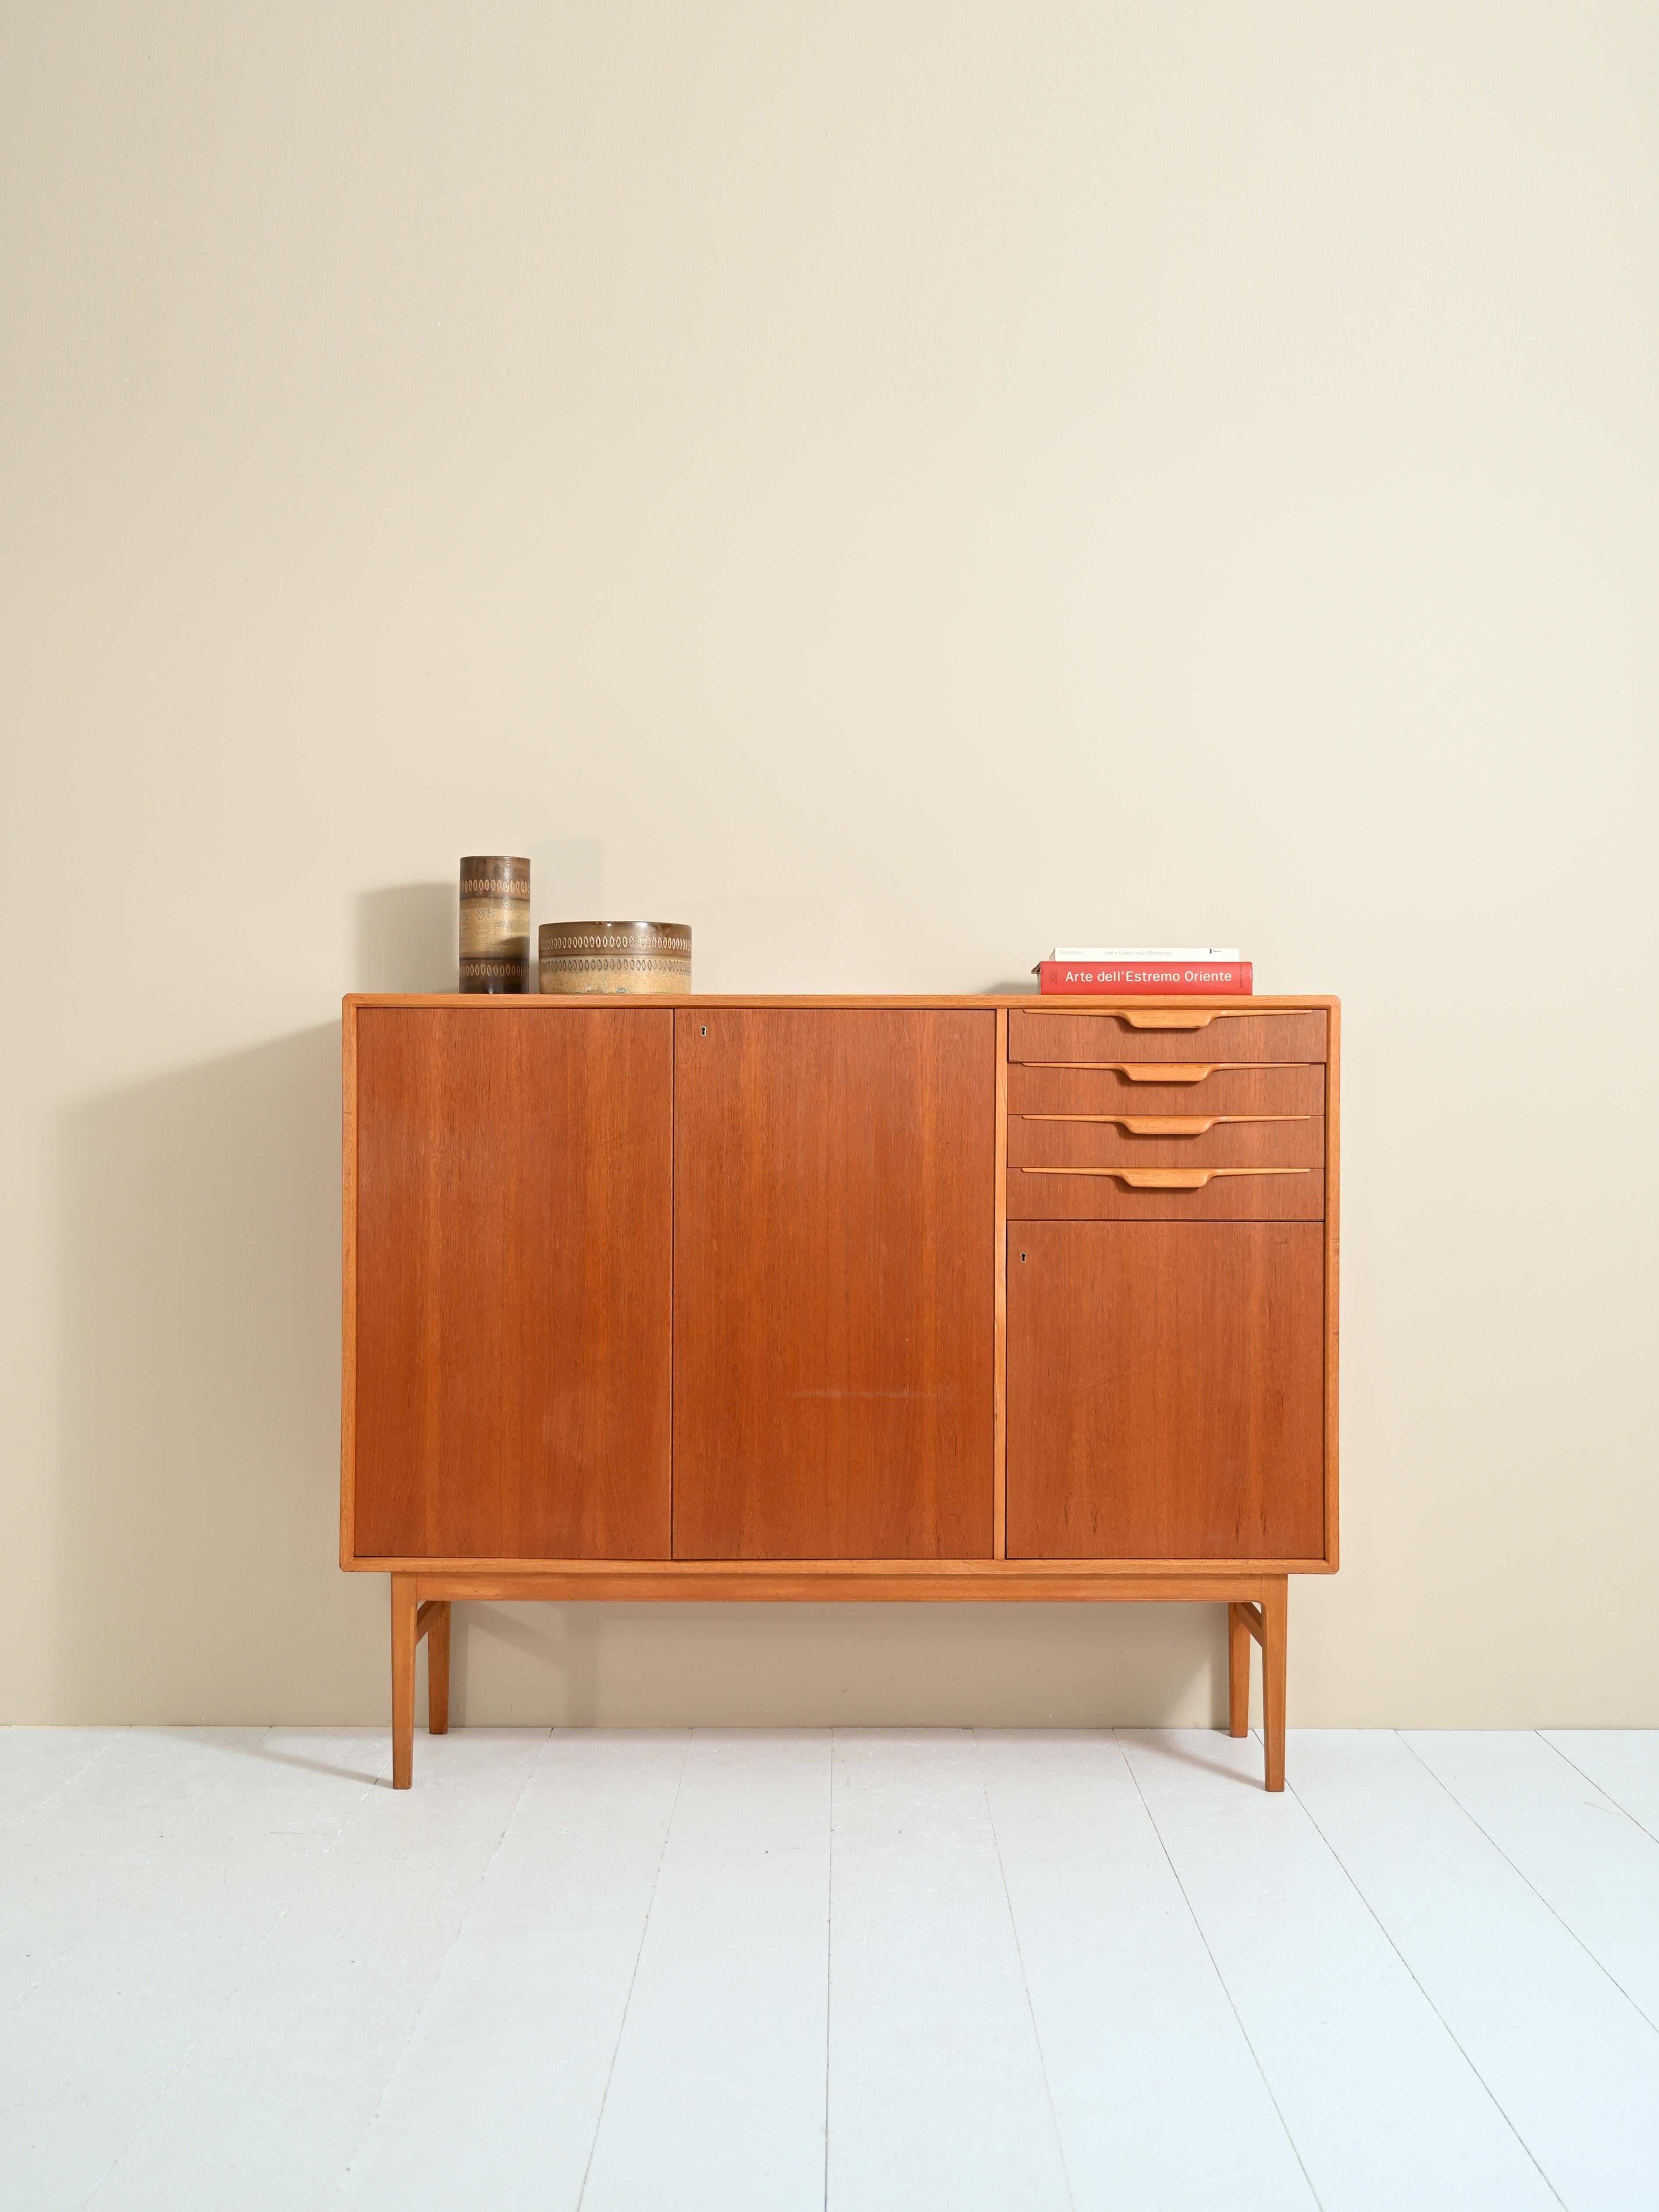 Sideboard designed by B. Fridhagen for Bodafors in the 1960s.

A capacious piece of furniture with a peculiar appearance. On one side is a storage compartment with hinged doors and on the other are four drawers and a small space also closed by a